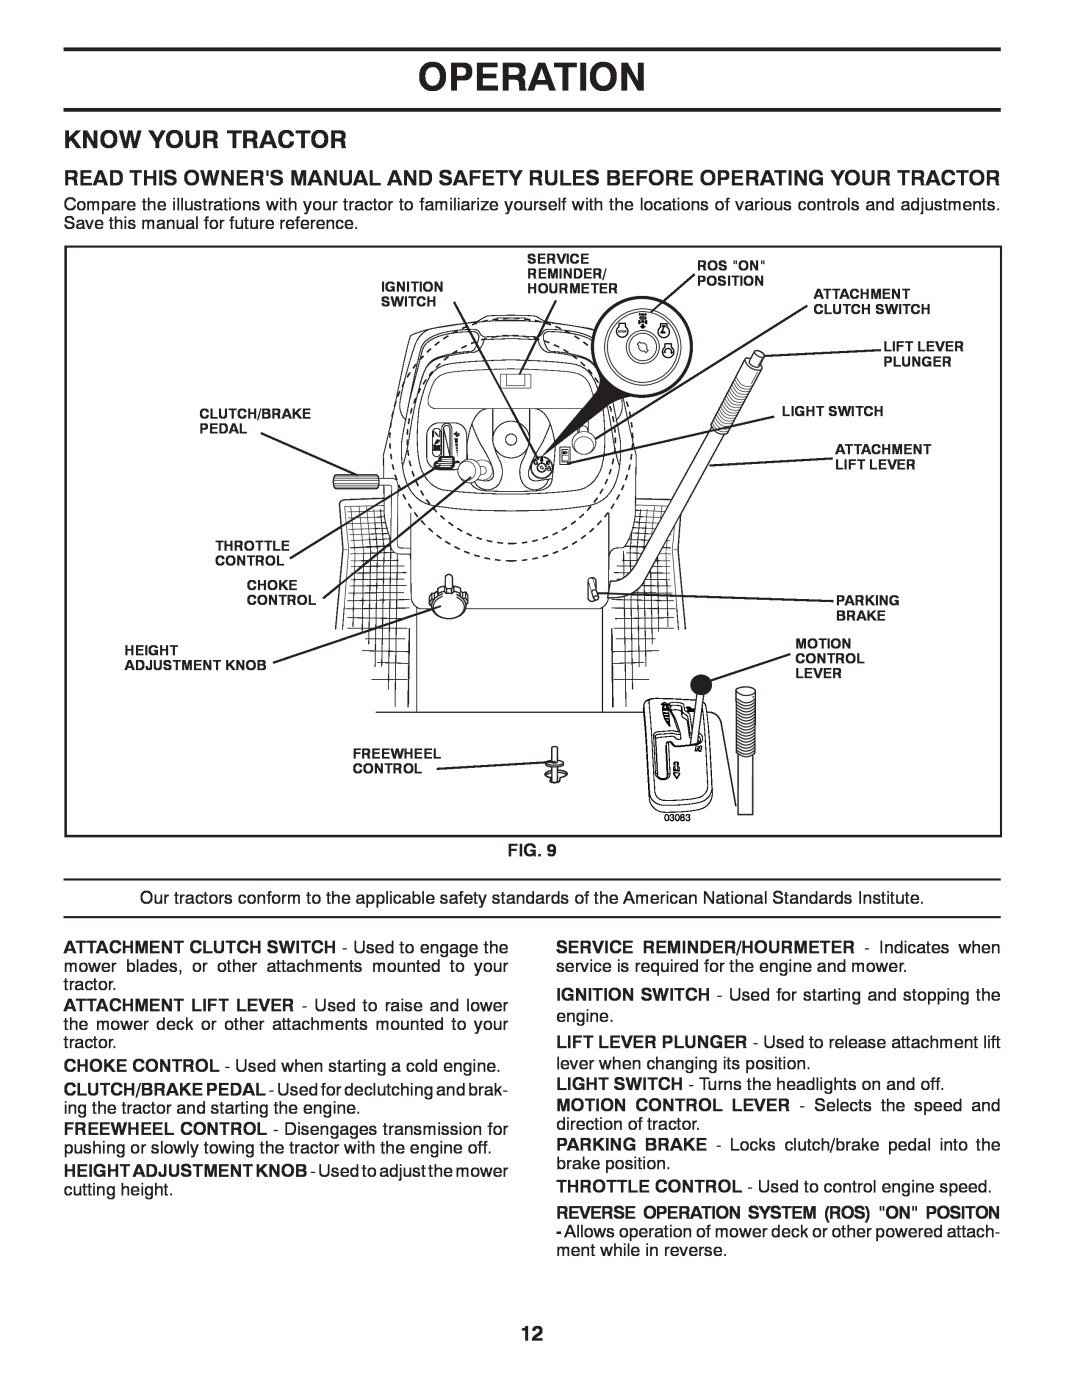 Husqvarna CTH2036 owner manual Know Your Tractor, Operation 